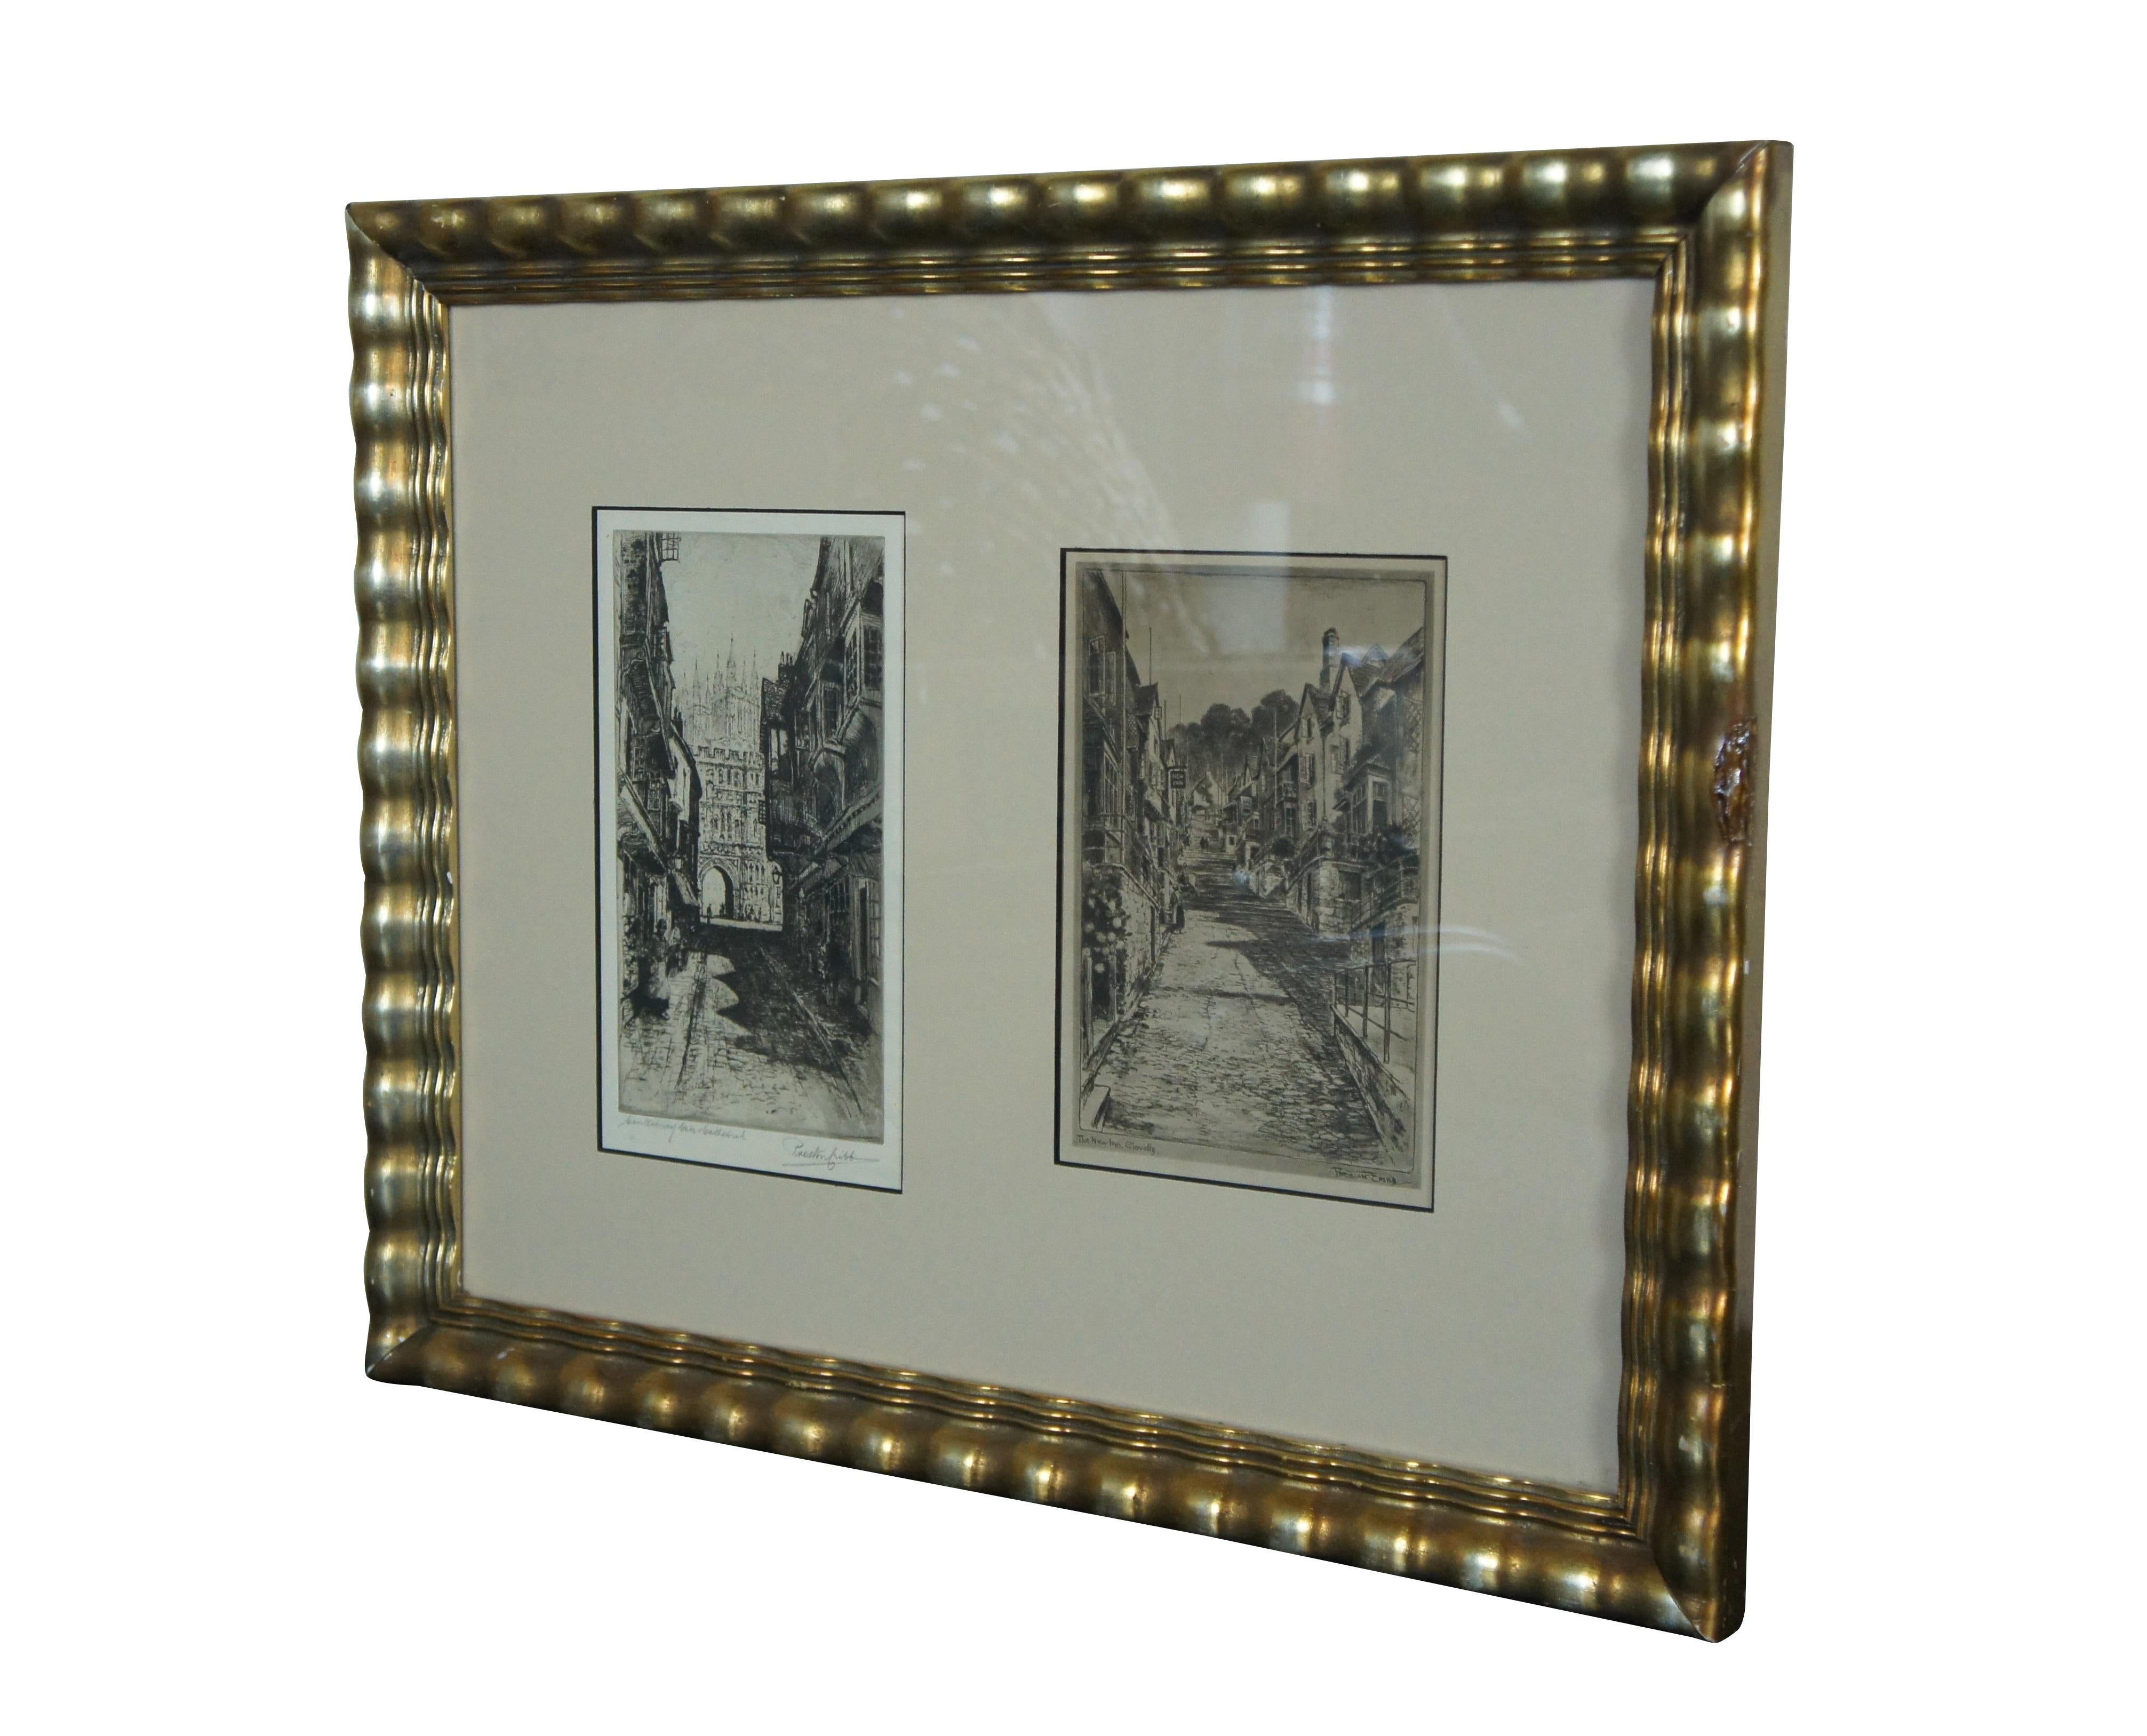 Late 19th - early 20th century pair of engravings framed as a diptych - 